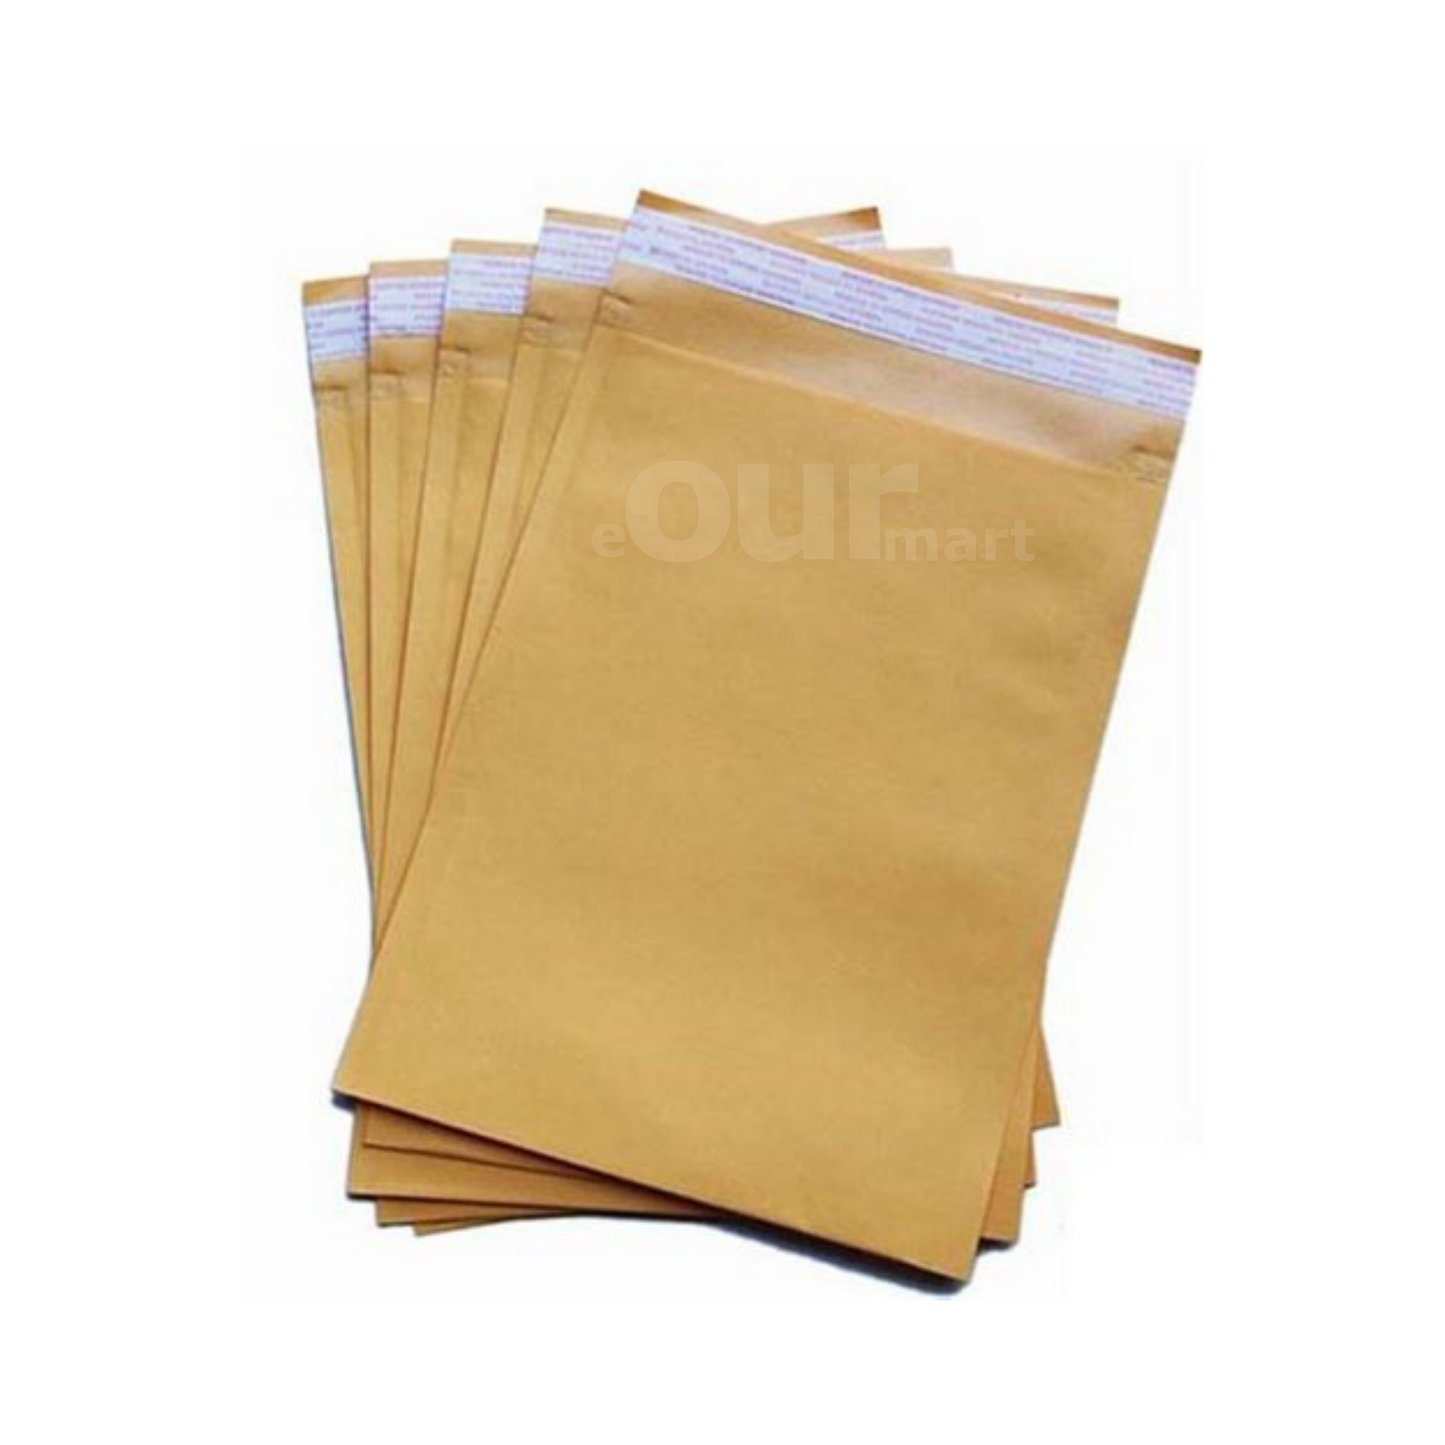 Paper Courier Bags, 8x10 Inches, (PB-2.5, 100 Bags)